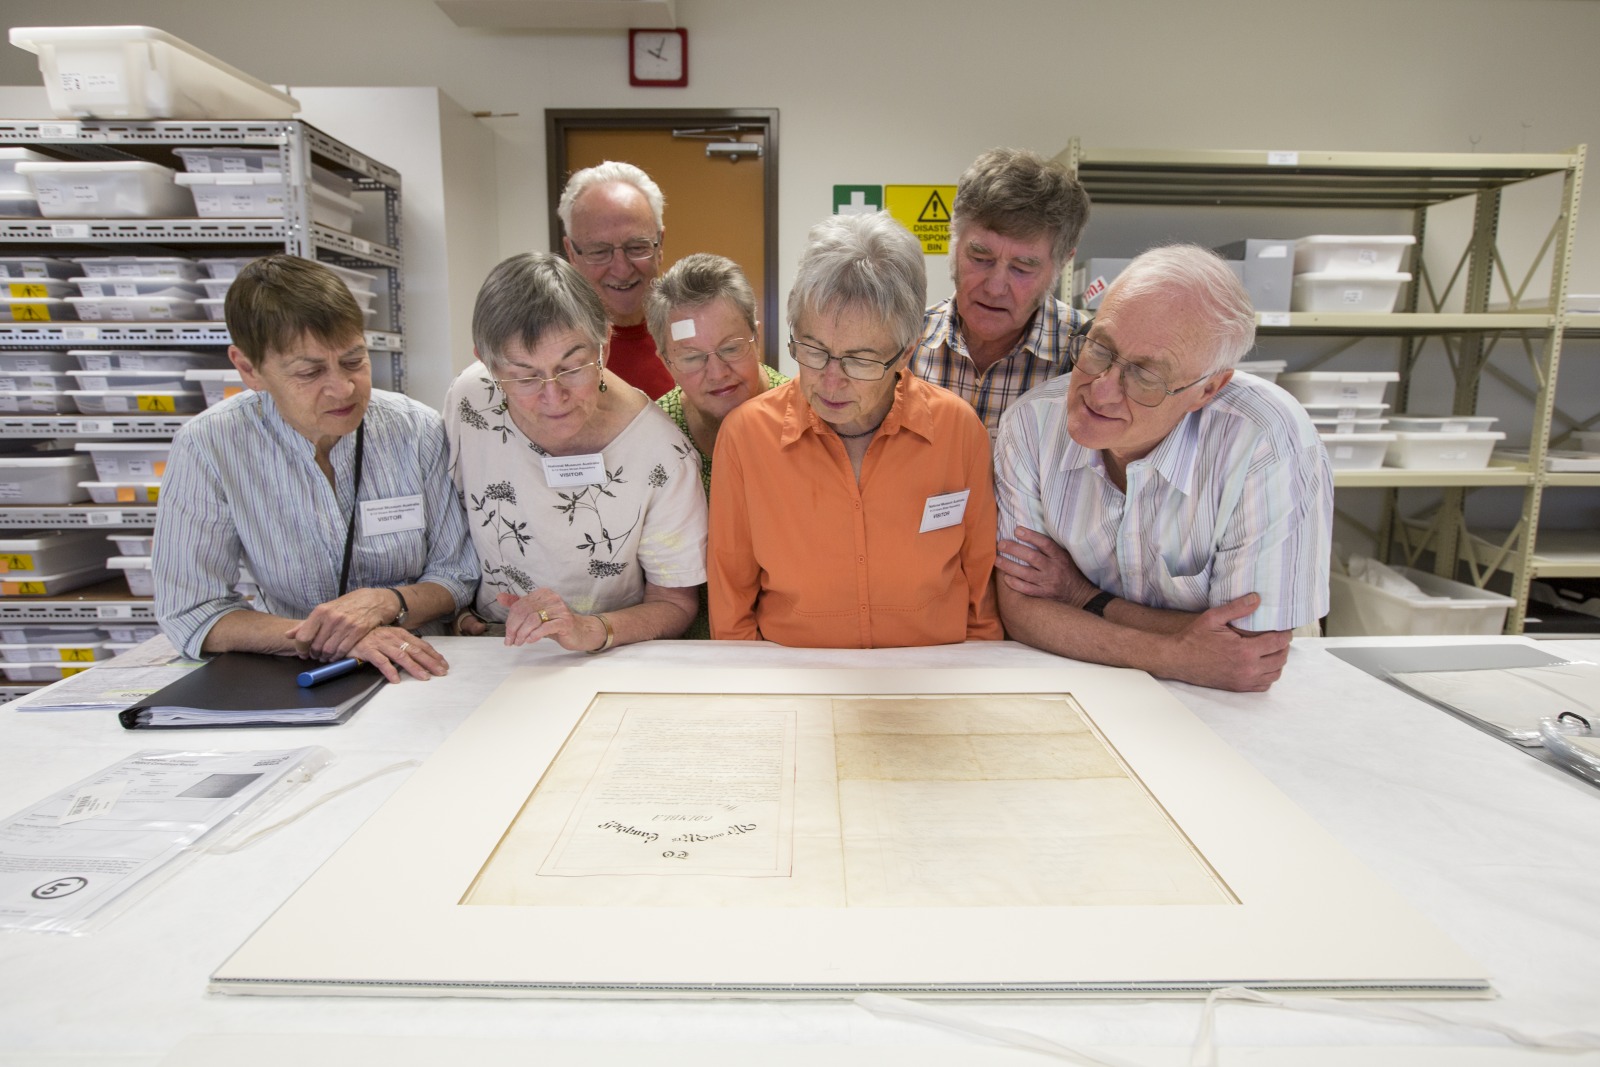 The four reunited Campbell descendants, joined by two of their spouses, celebrate their family history by inspecting the letter of sympathy presented to David and Amelia by the inhabitants of Forbes. Photo by Jason McCarthy, National Museum of Australia